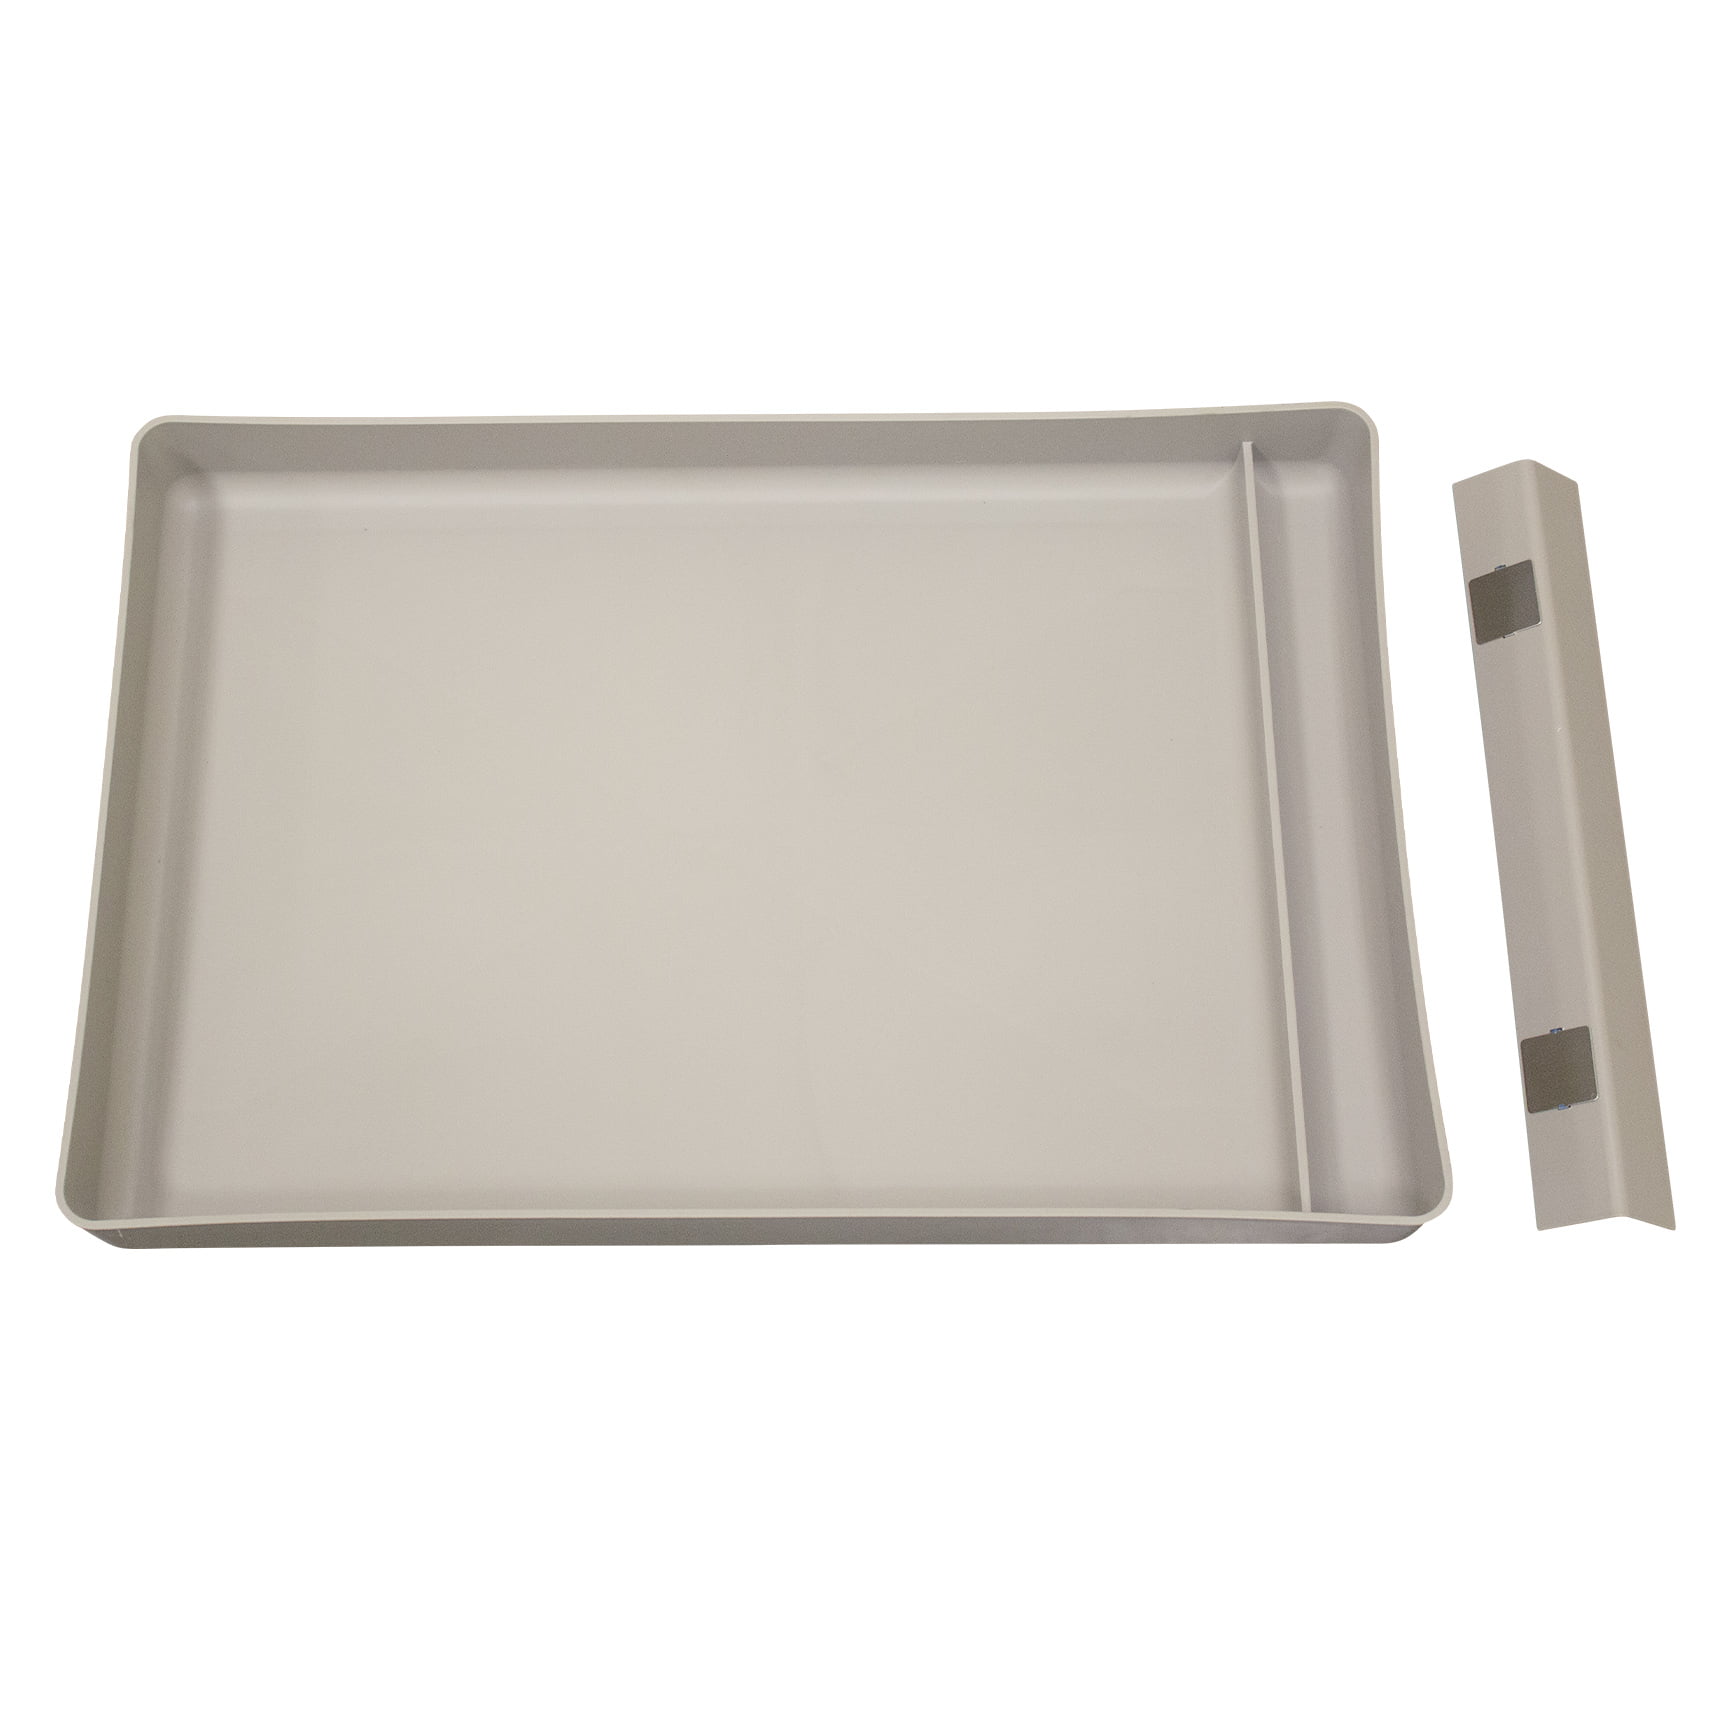 PET STANDARD Reusable Tray Compatible with PetSafe ScoopFree Self-Cleaning Cat Litterbox